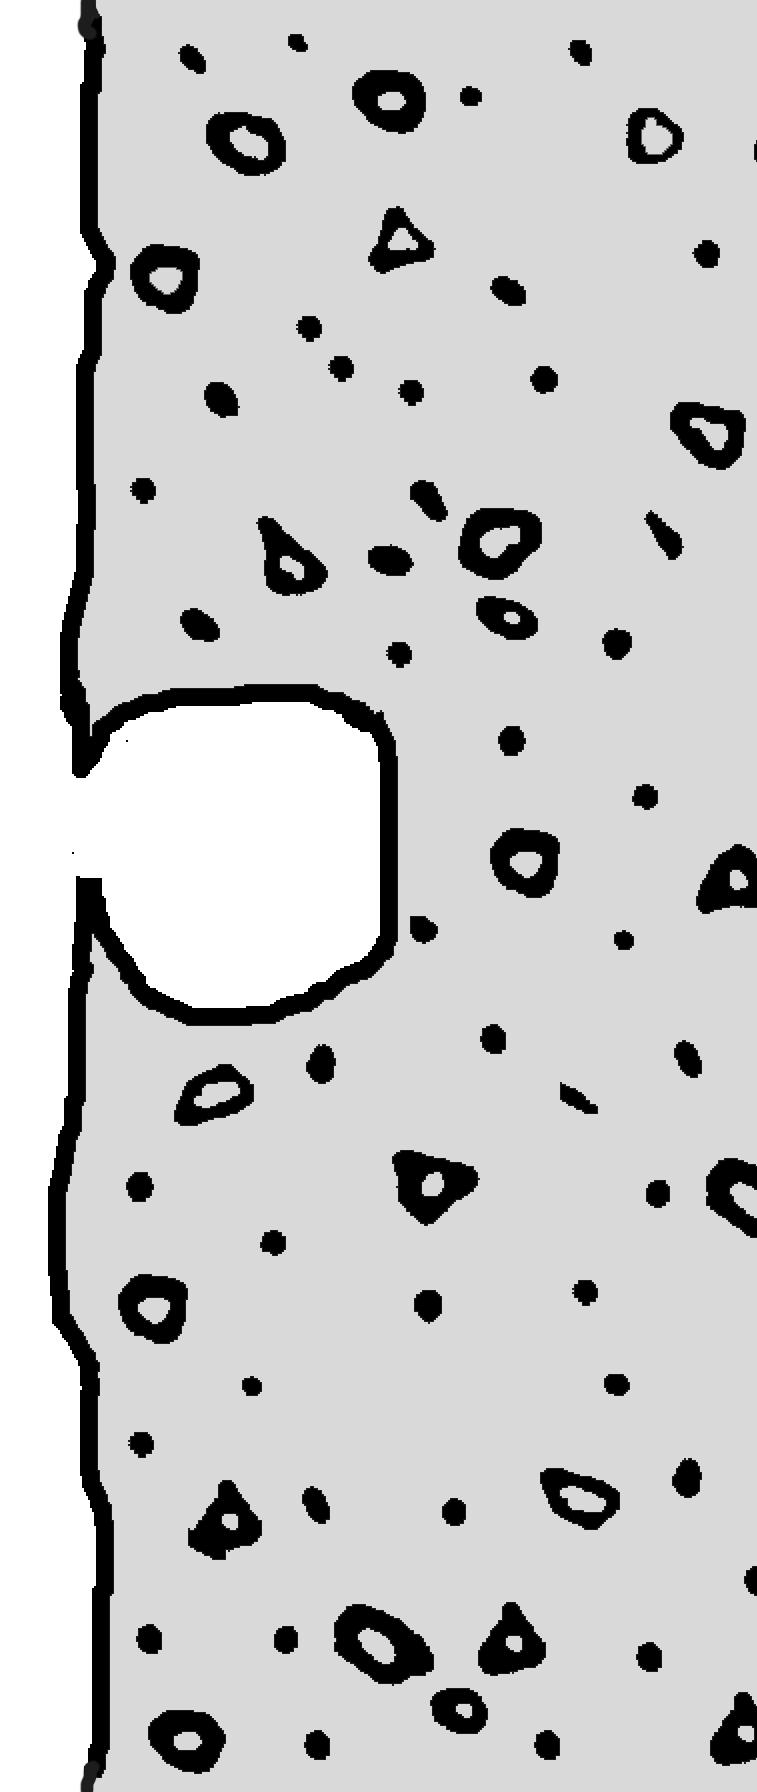 4.3 Bugholes Bugholes appear as small holes in concrete. These Figure 2 holes often lead to larger holes under the surface of the concrete (see Figure 2).